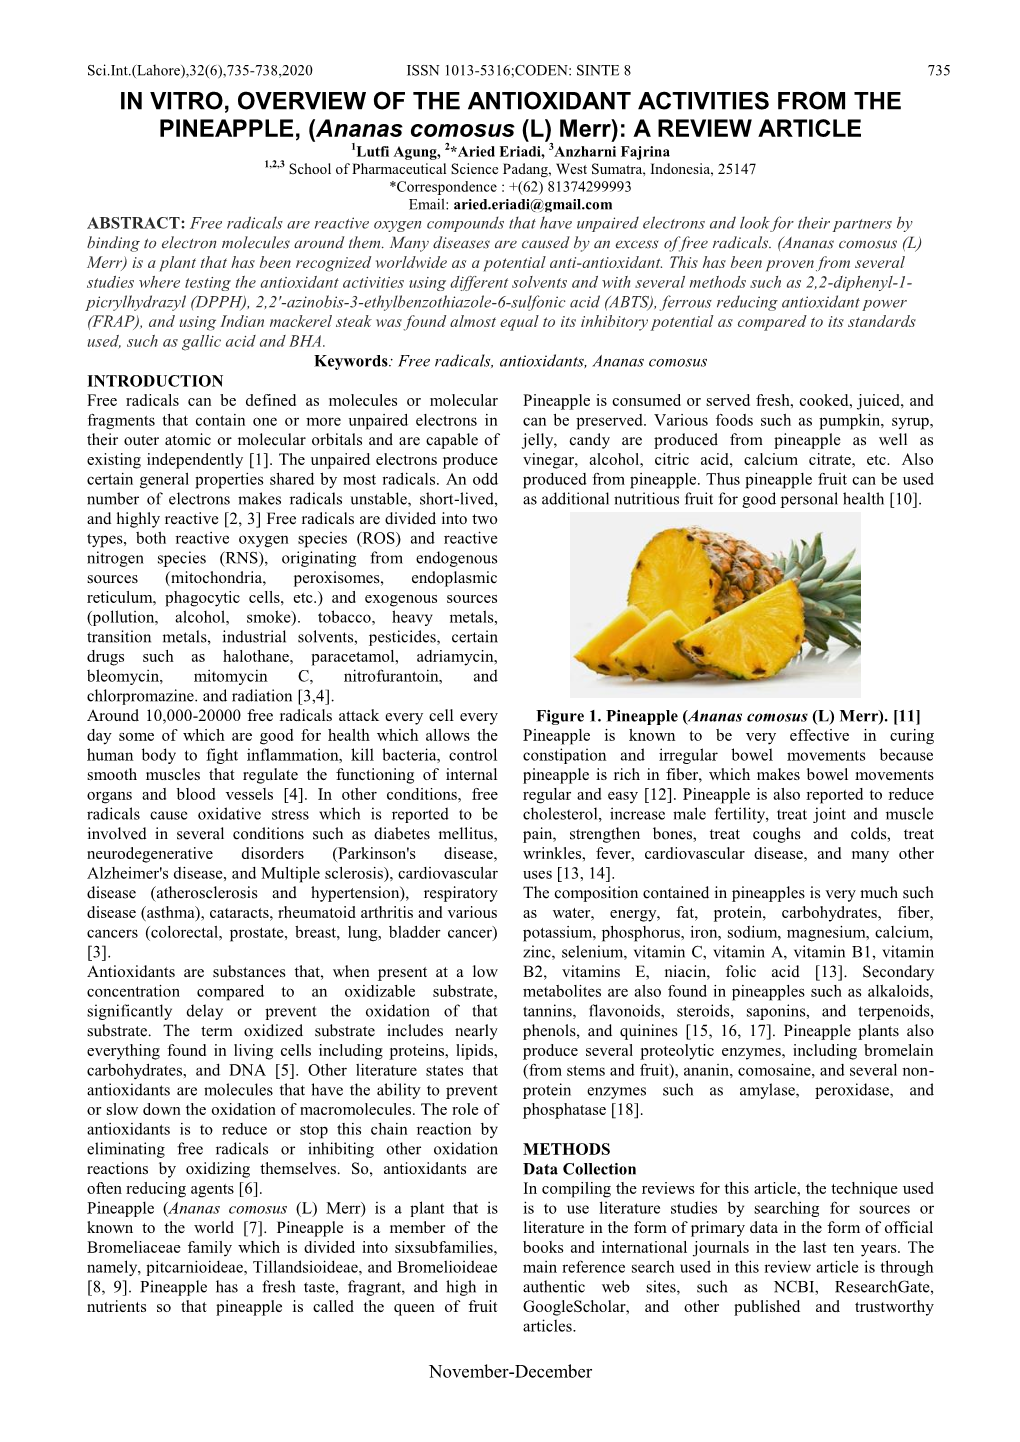 In Vitro, Overview of the Antioxidant Activities From